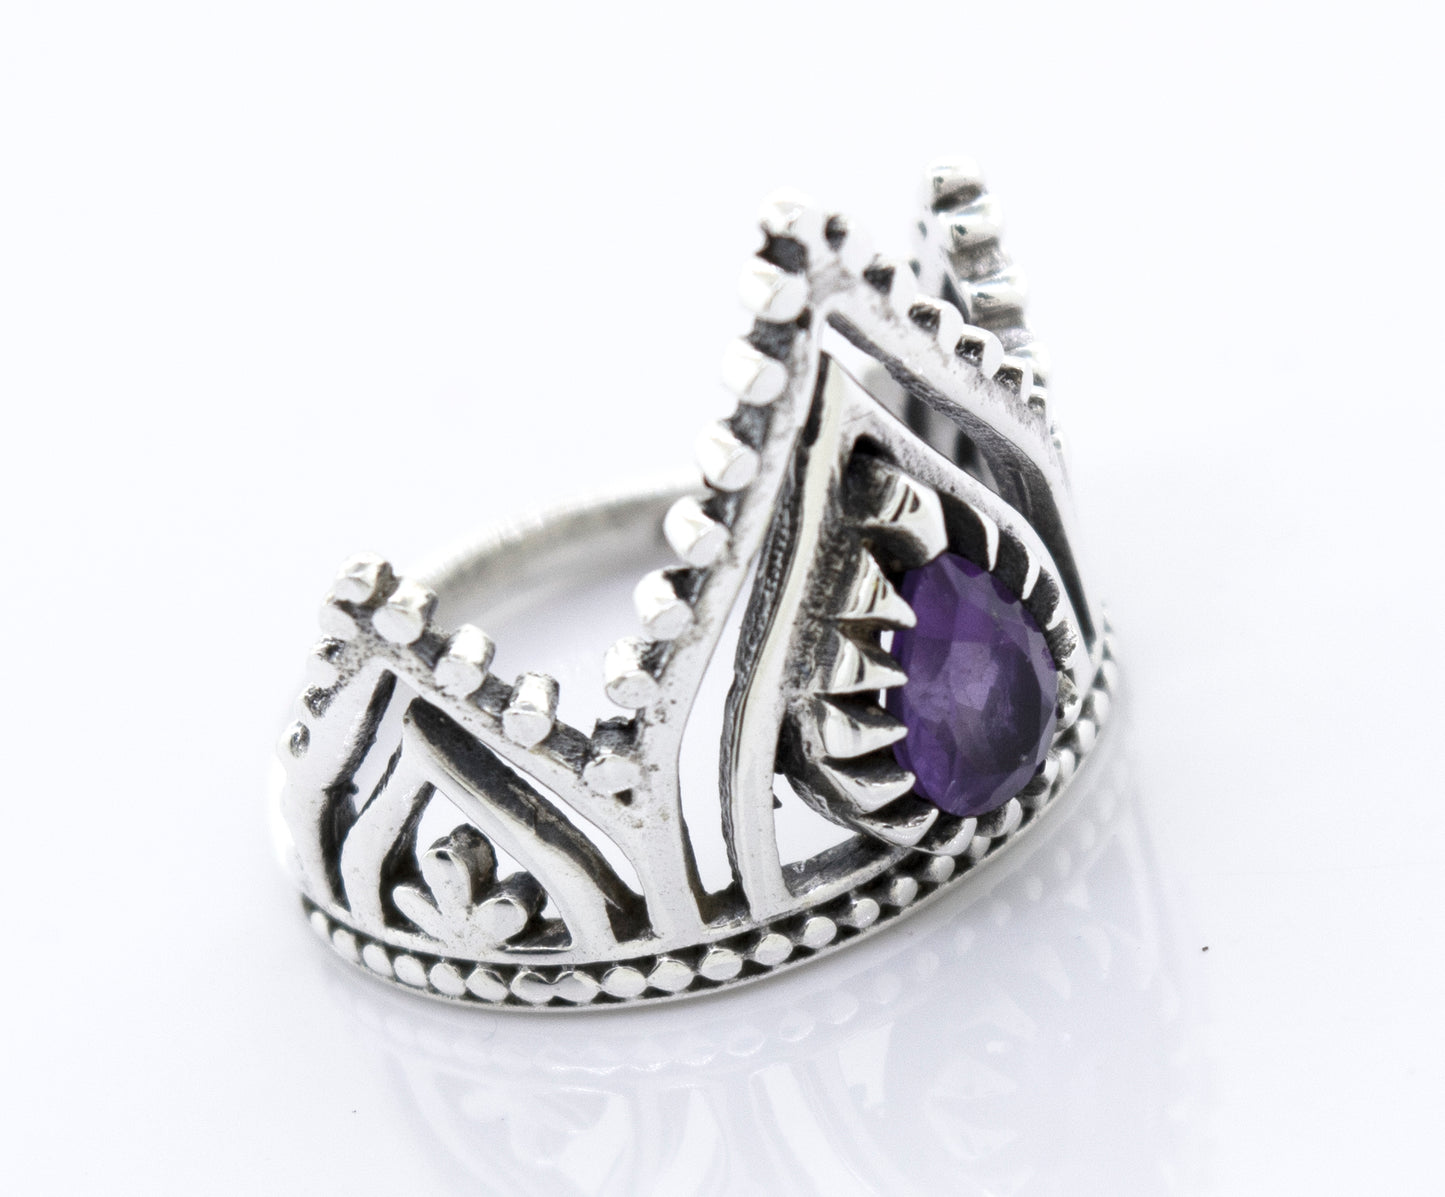 A Super Silver Silver Crown Ring With Teardrop Shape Amethyst.